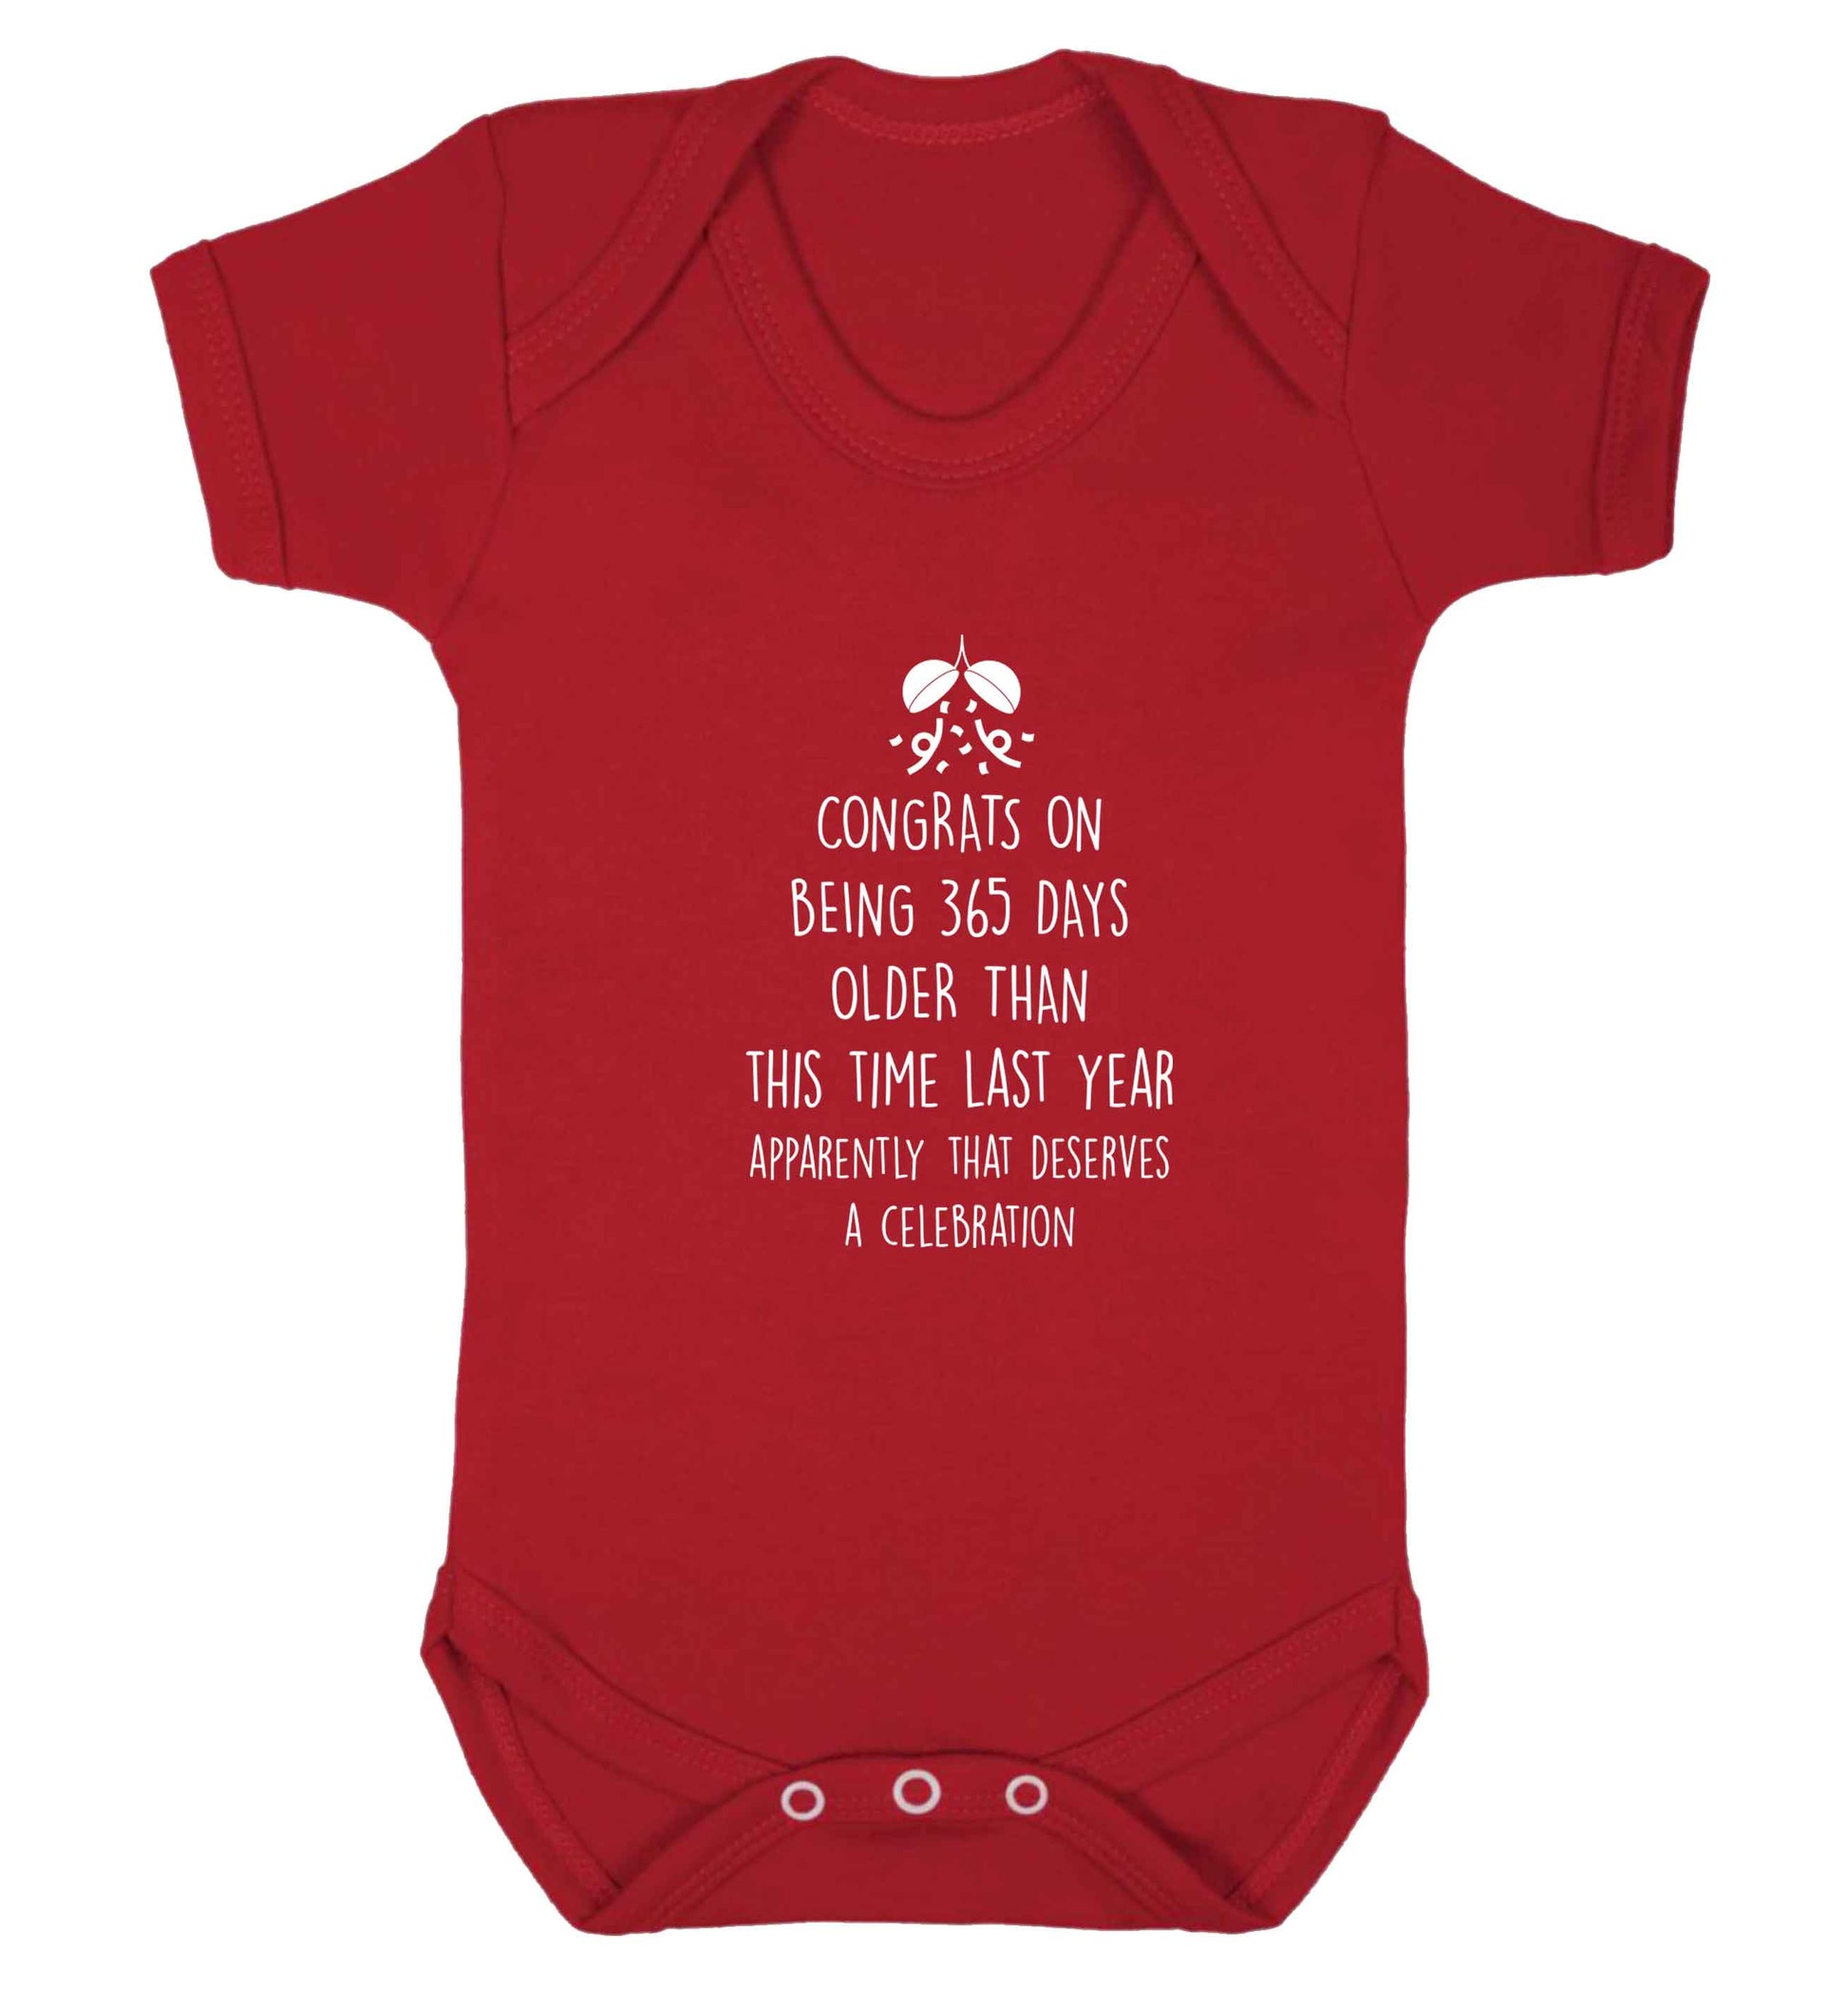 Congrats on being 365 days older than you were this time last year apparently that deserves a celebration baby vest red 18-24 months